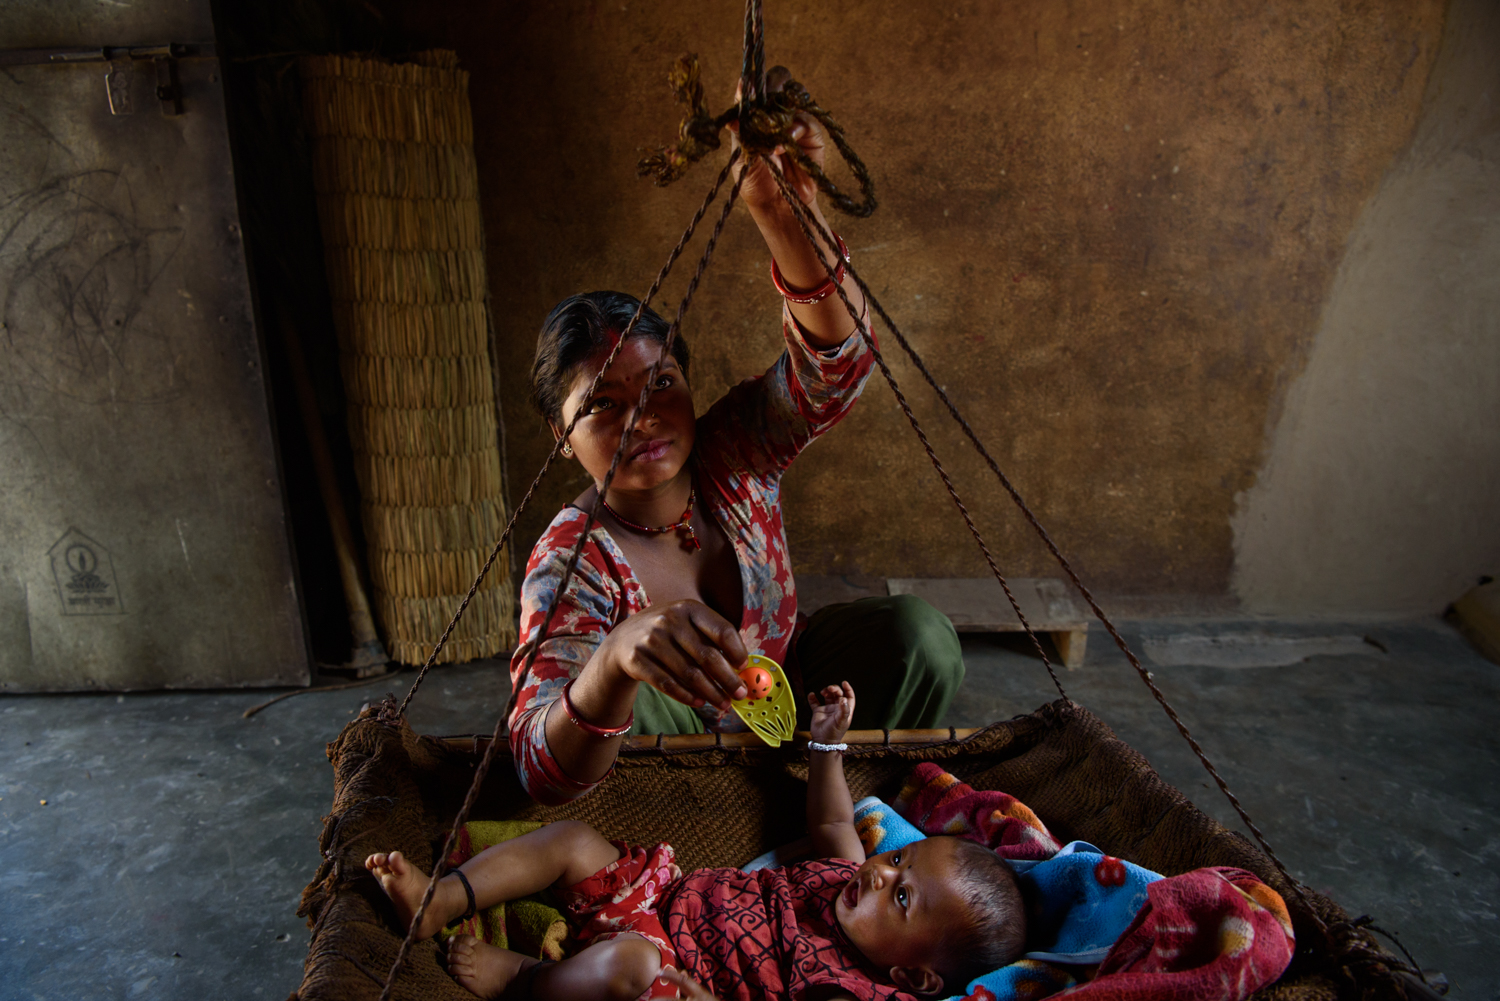  Sarita Majhi (17) with her five months old daughter Sumita at her home in Malpur Village, Chitwan, Nepal. Sarita says she was not interested in studies and left education after class 7. She eloped and married Shiva (20) who works as a labourer in De